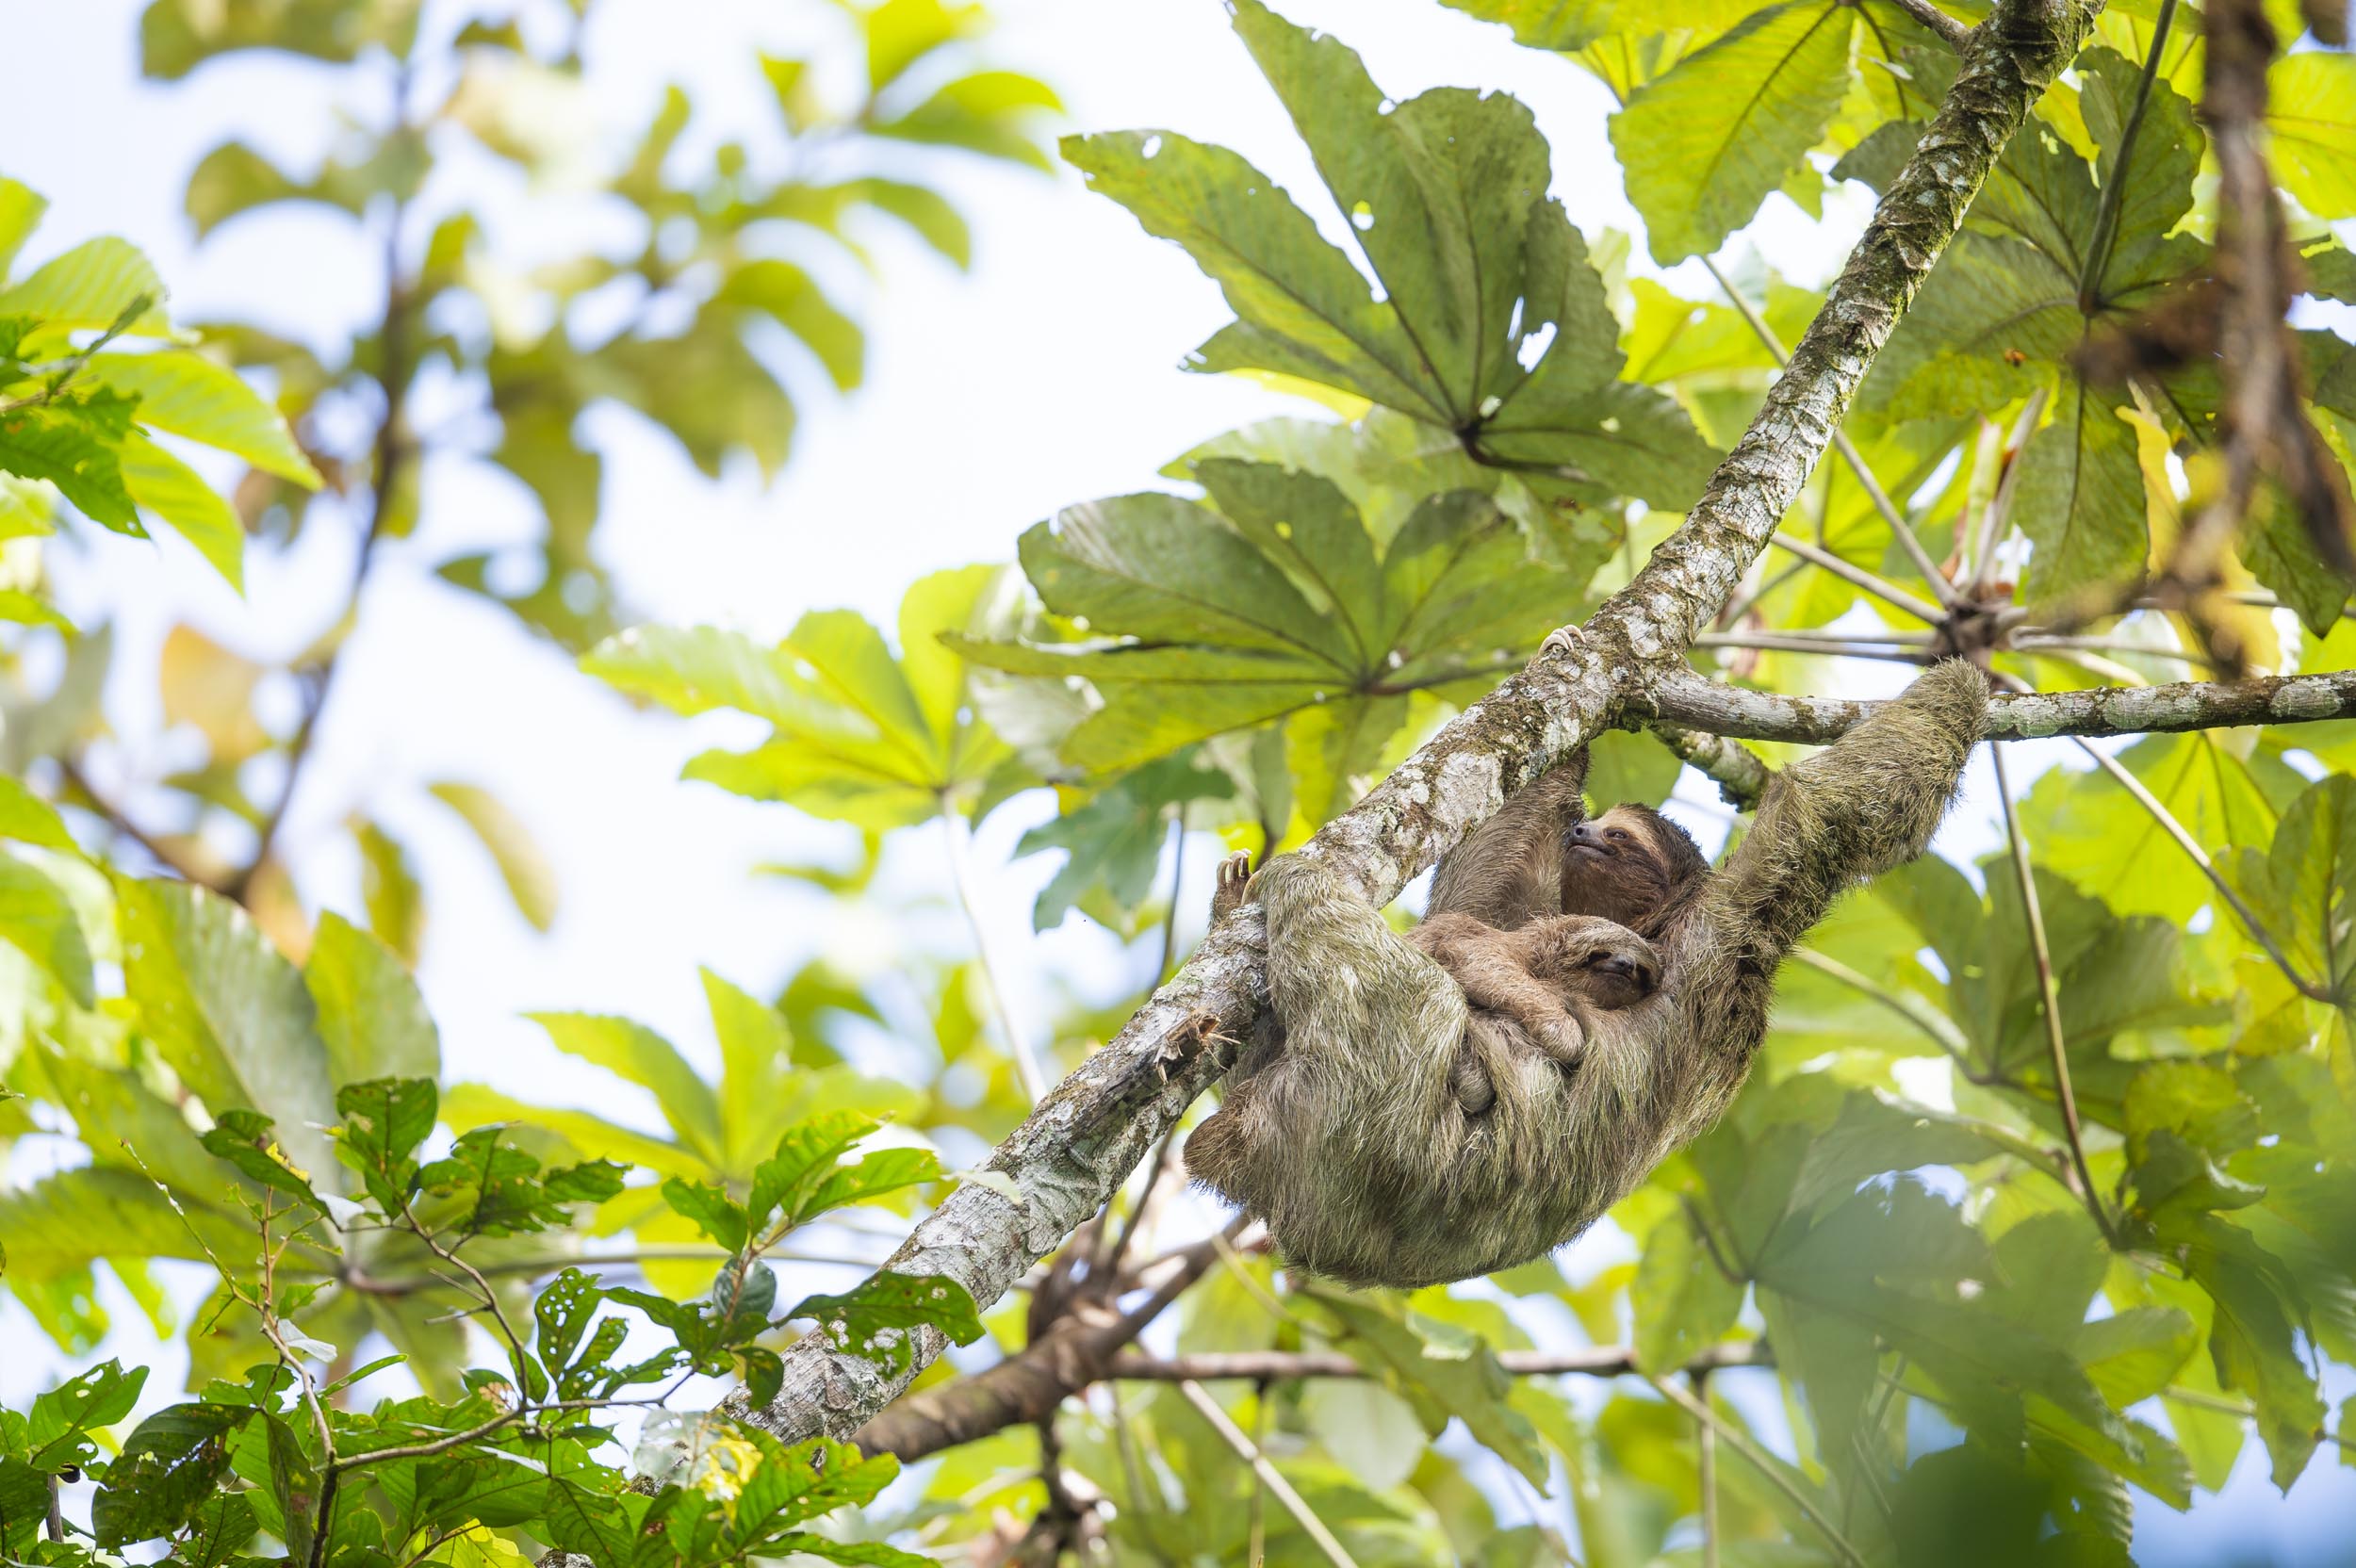 Tropical rain forests are home to sloths